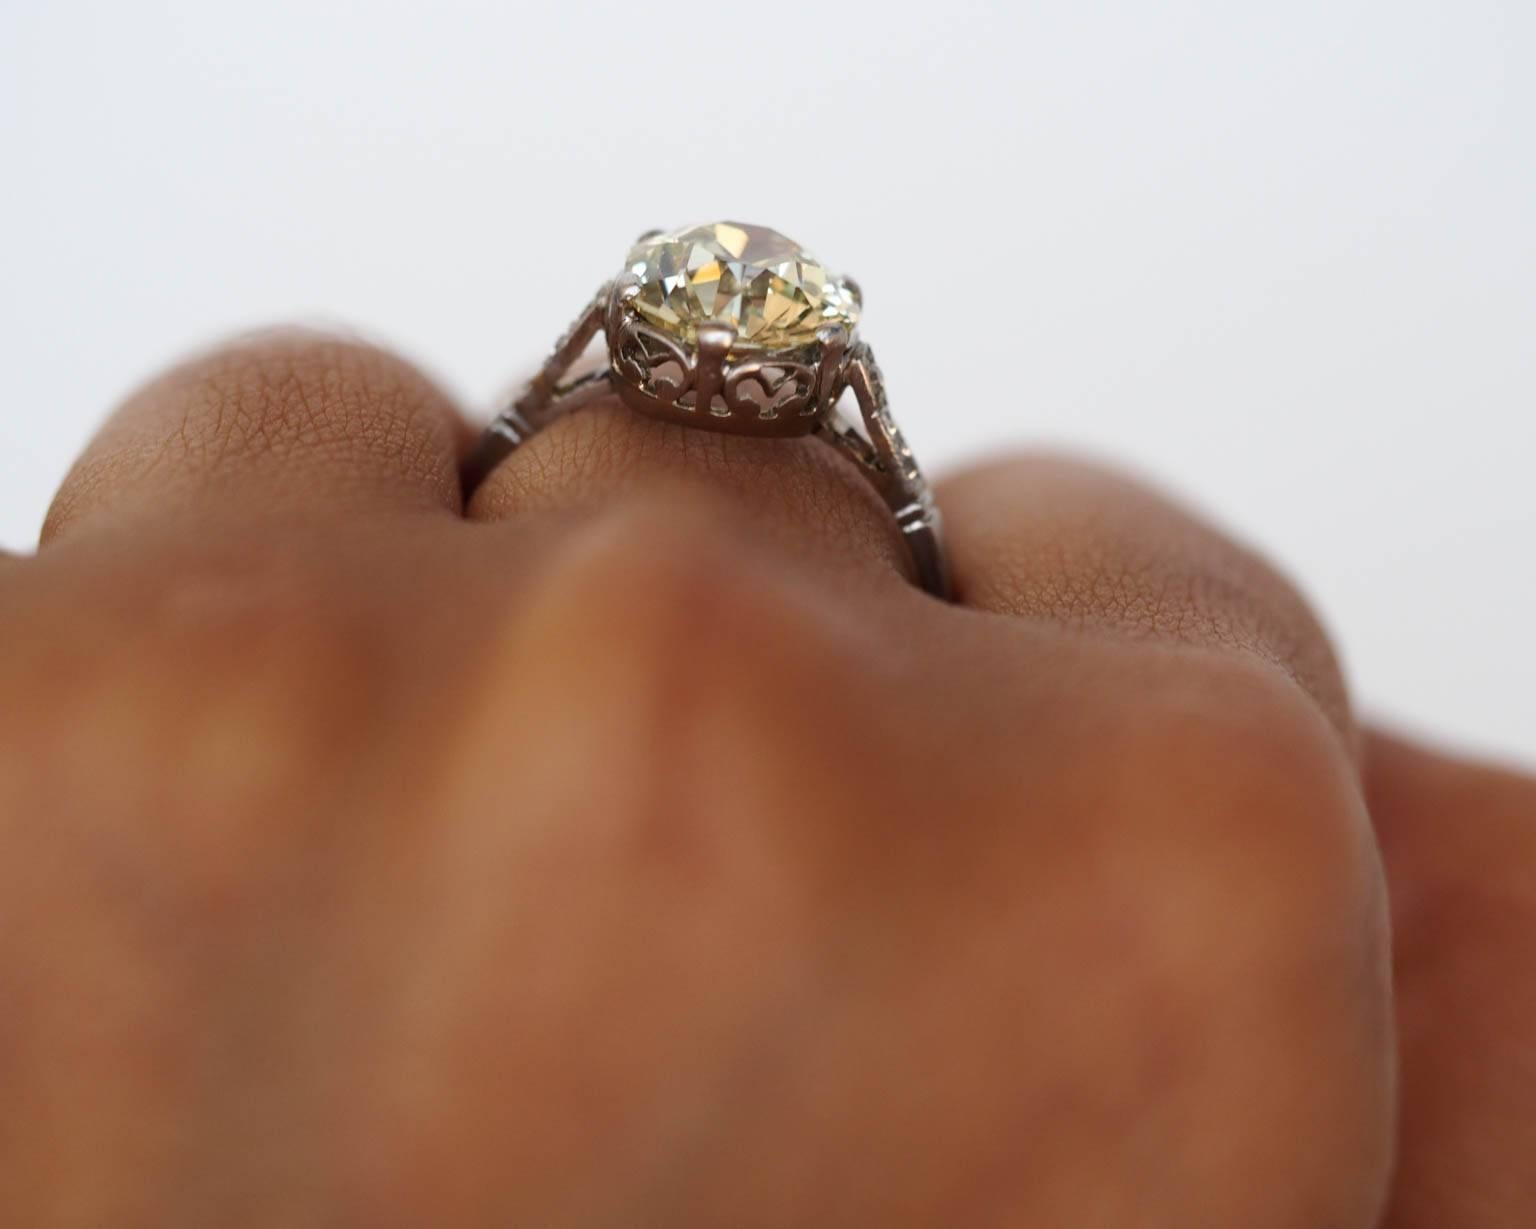 

Here is an absolutely jaw dropping & delicious engagement ring. This platinum Edwardian piece is hand crafted in platinum, with beautiful gallery work under the basket of the ring and antique cut diamonds on both sides of the center stone. The